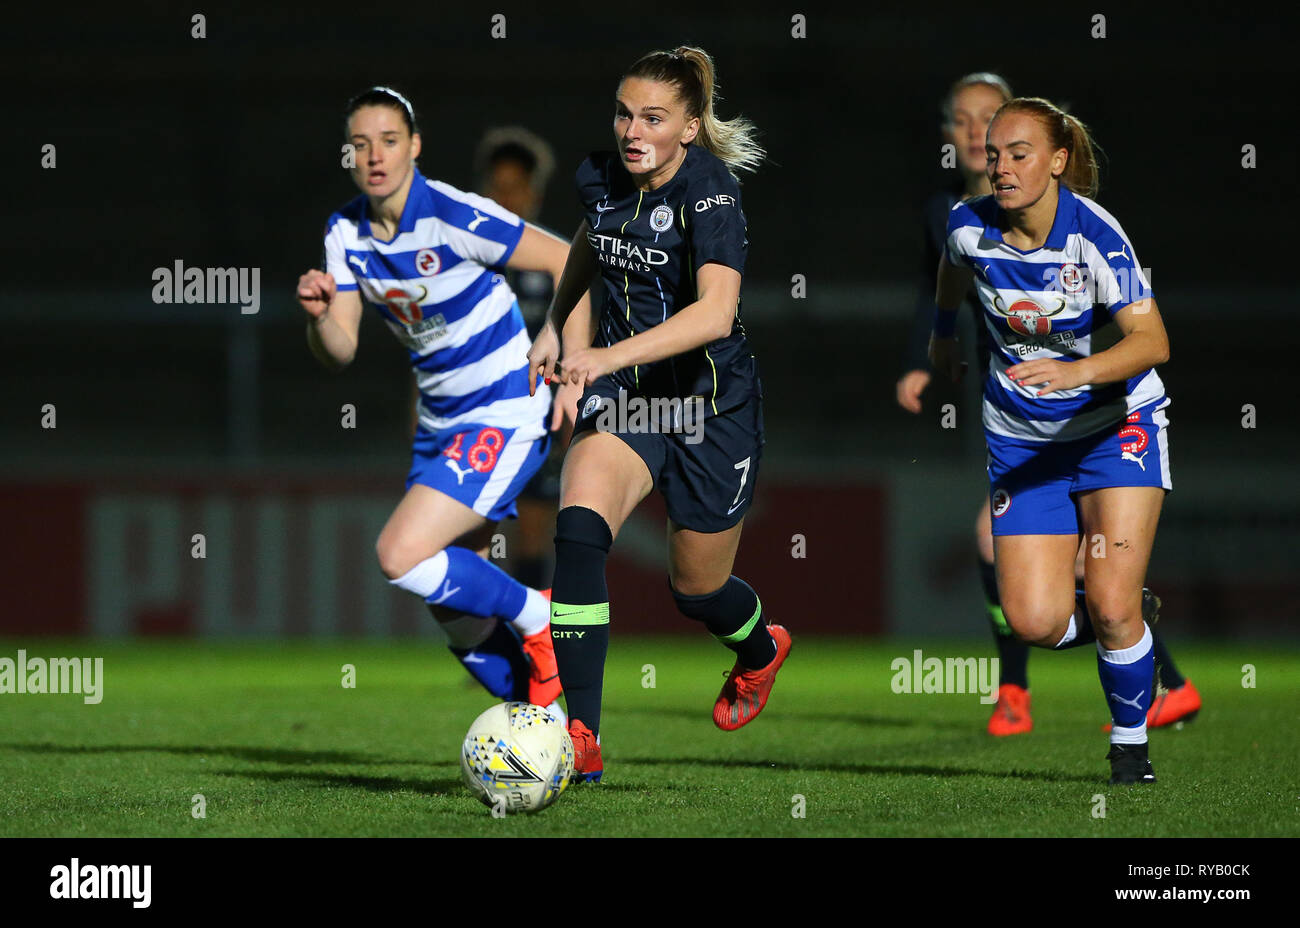 High Wycombe, Bucks, UK. 13th Mar, 2019. Melissa Lawley of Manchester City in action during the Women's Super League match between Reading FC Women and Manchester City Women at Adams Park, High Wycombe, England on 13th March 2019. Editorial Use Only Credit: Paul Terry Photo/Alamy Live News Stock Photo